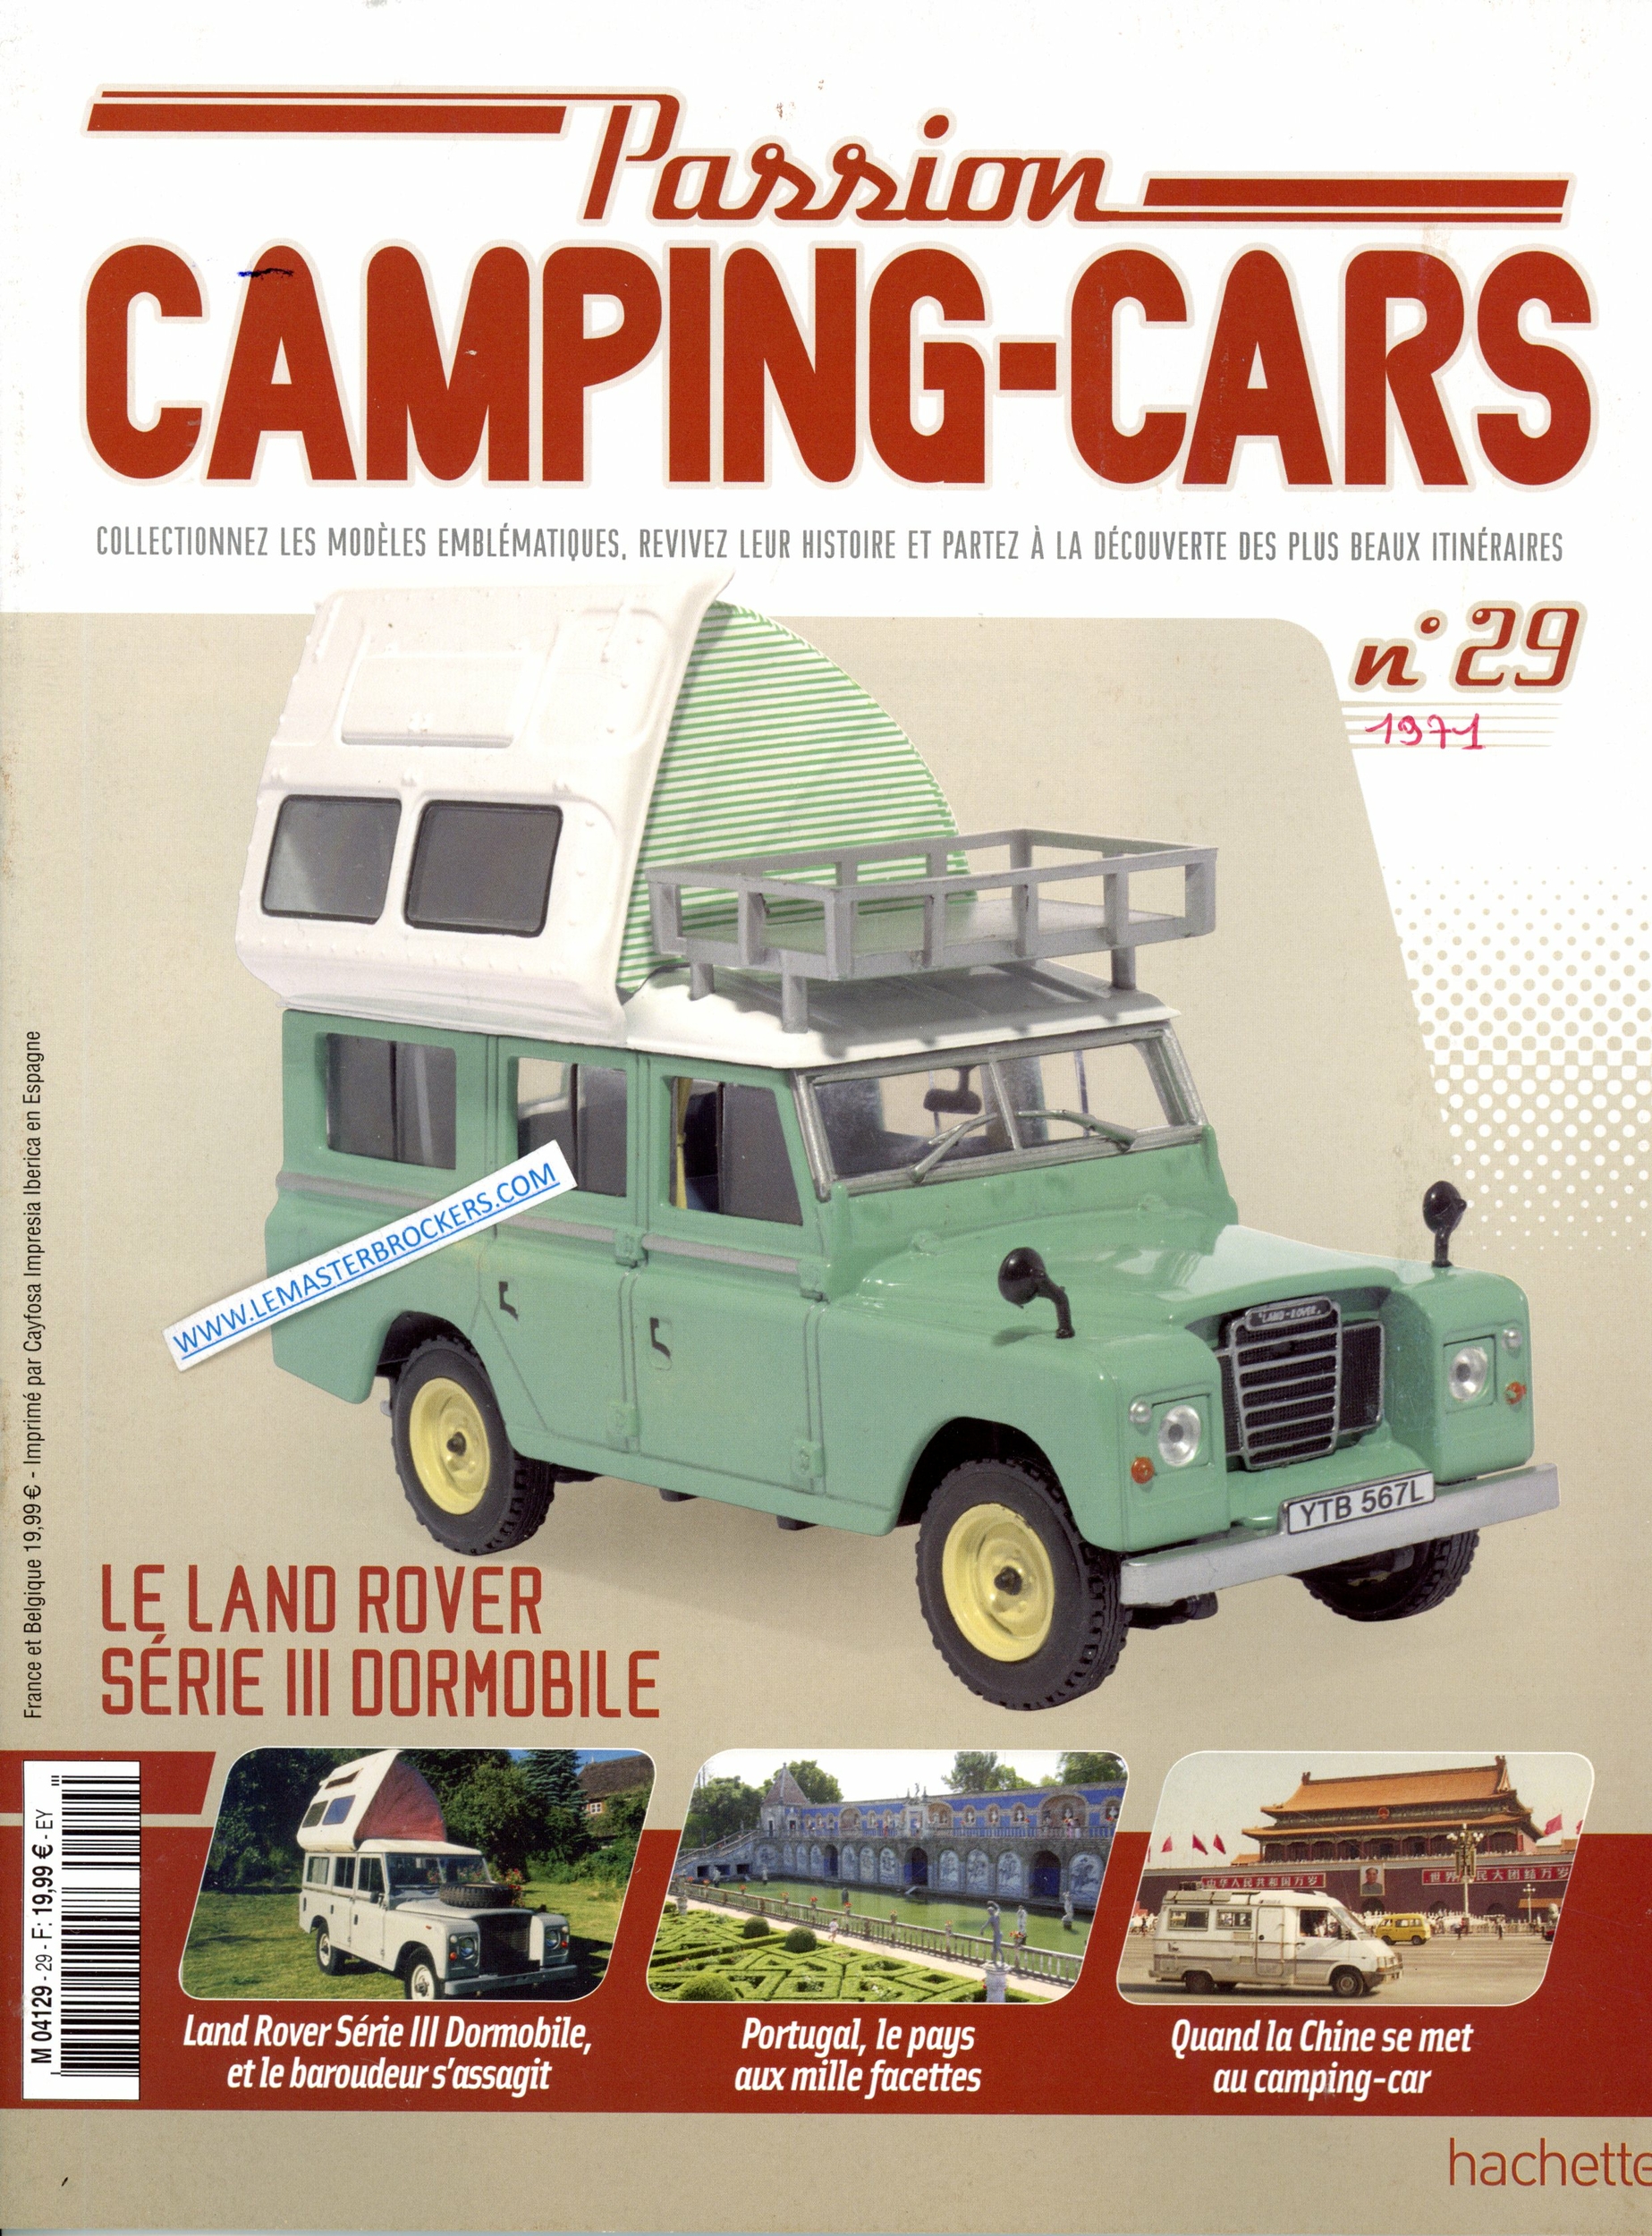 LAND ROVER DORMOBILE PASSION CAMPING-CARS